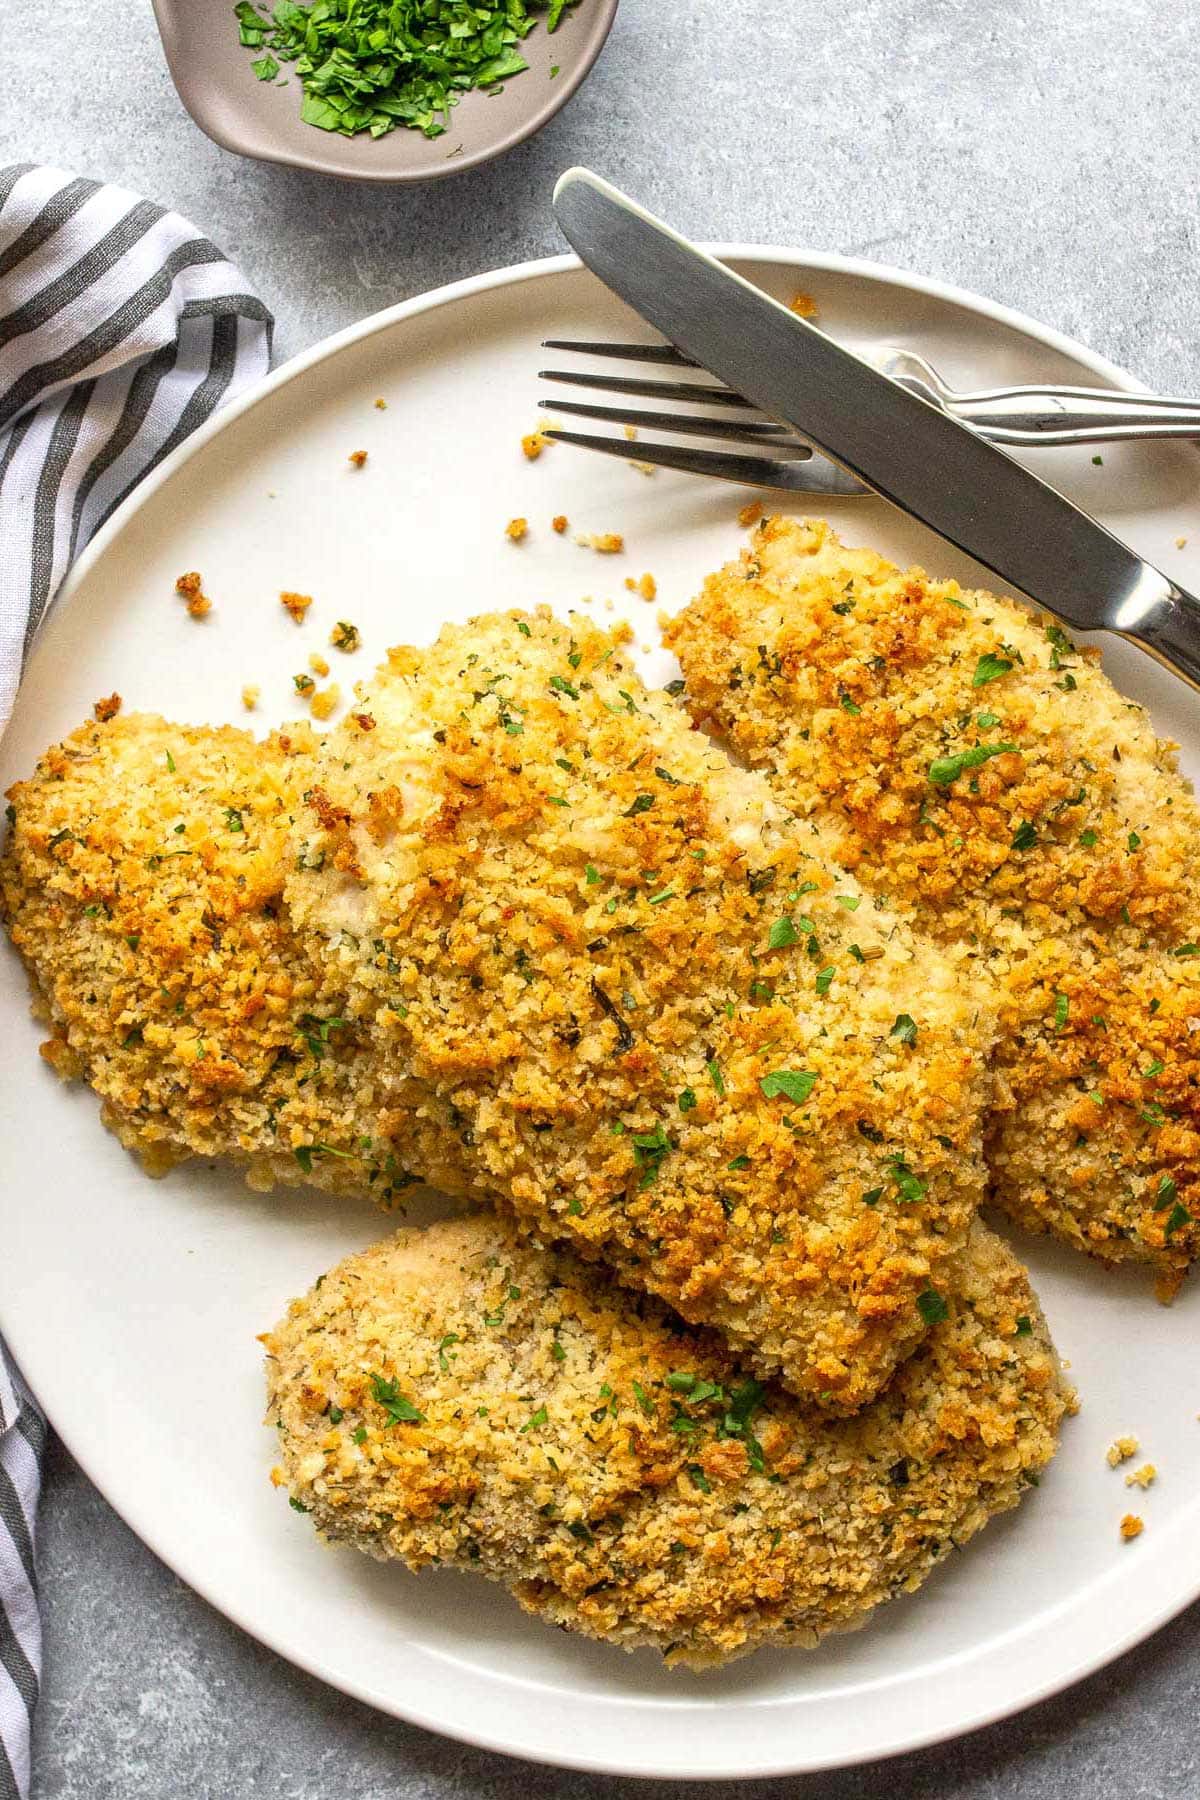 Four baked Parmesan crusted chicken breasts on a white plate topped with parsley.